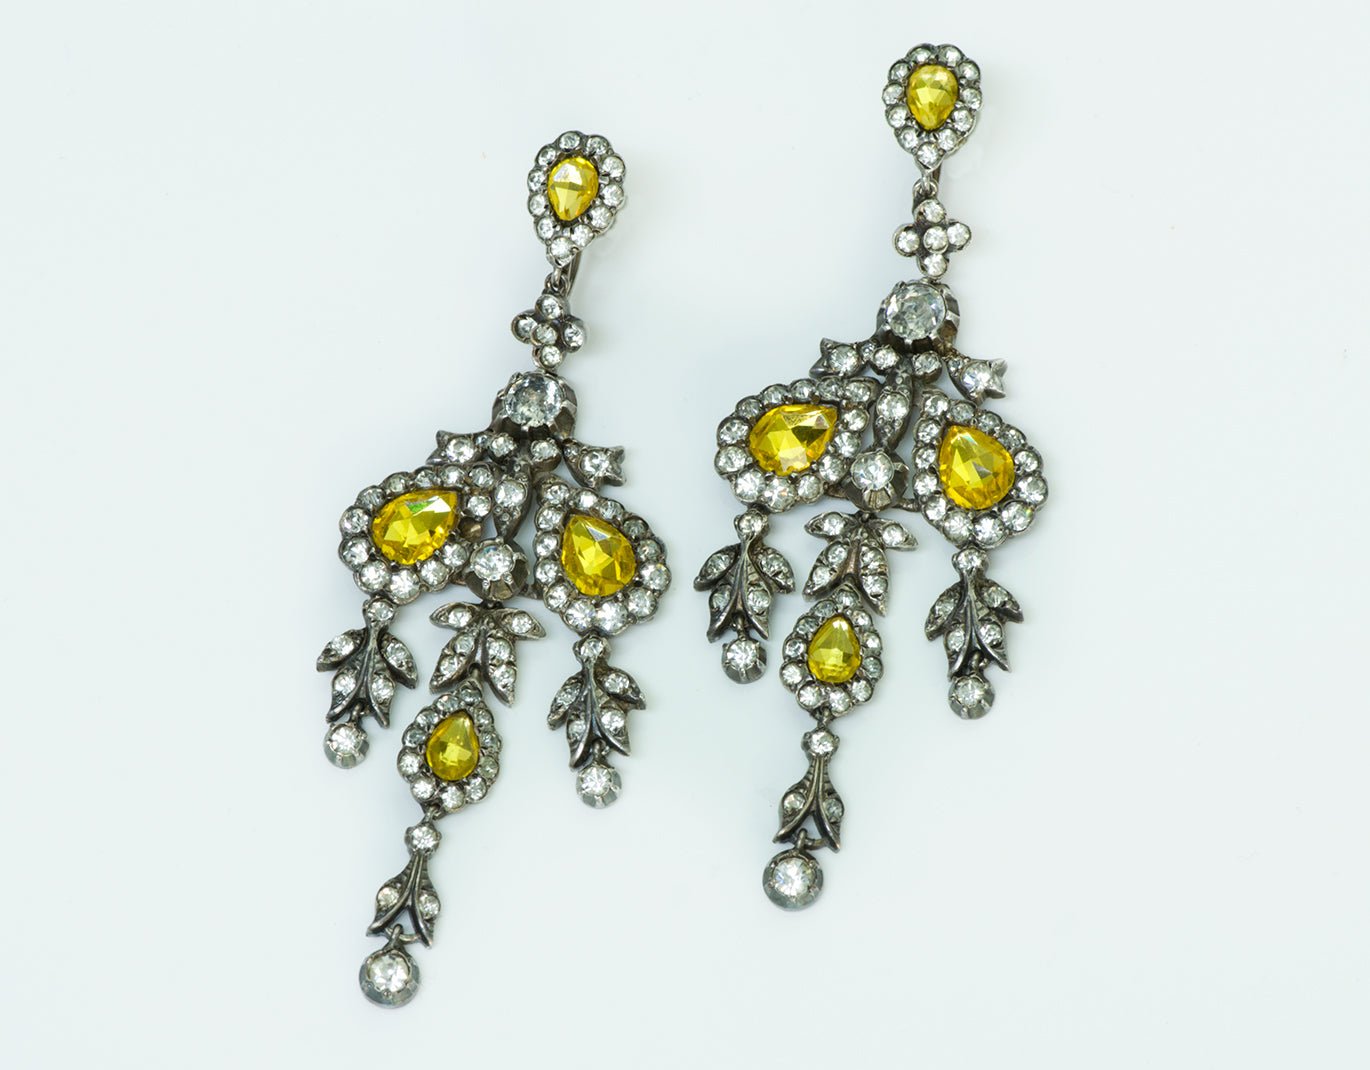 Antique Paste Yellow Stone Silver Chandelier Earrings - DSF Antique Jewelry